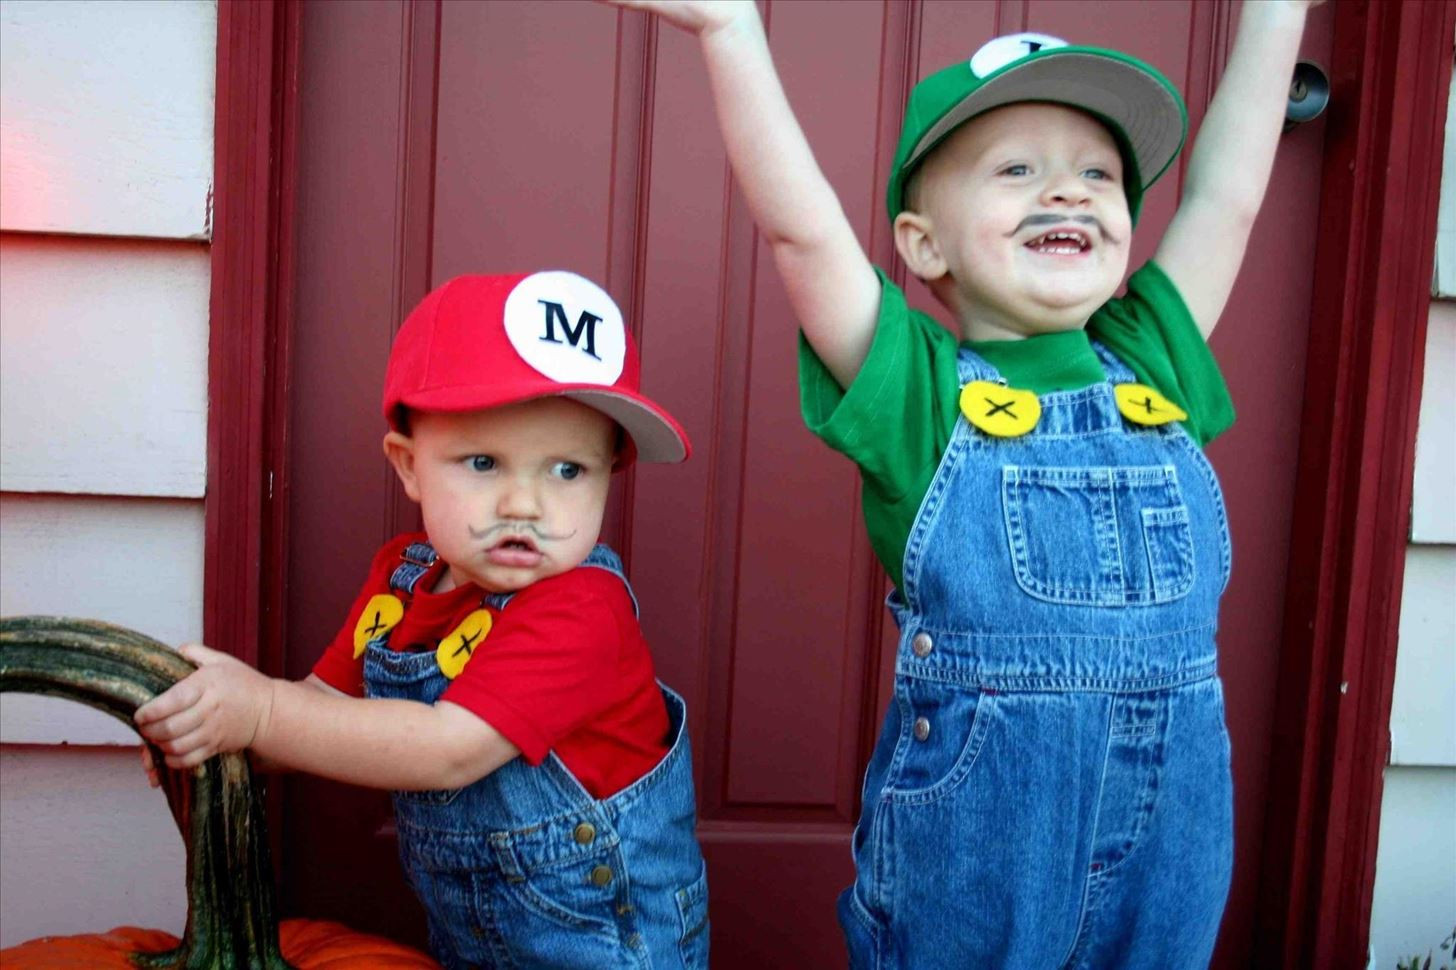 Easy DIY Halloween Costumes For Toddlers
 10 Cheap Easy & Awesome DIY Halloween Costumes for Kids